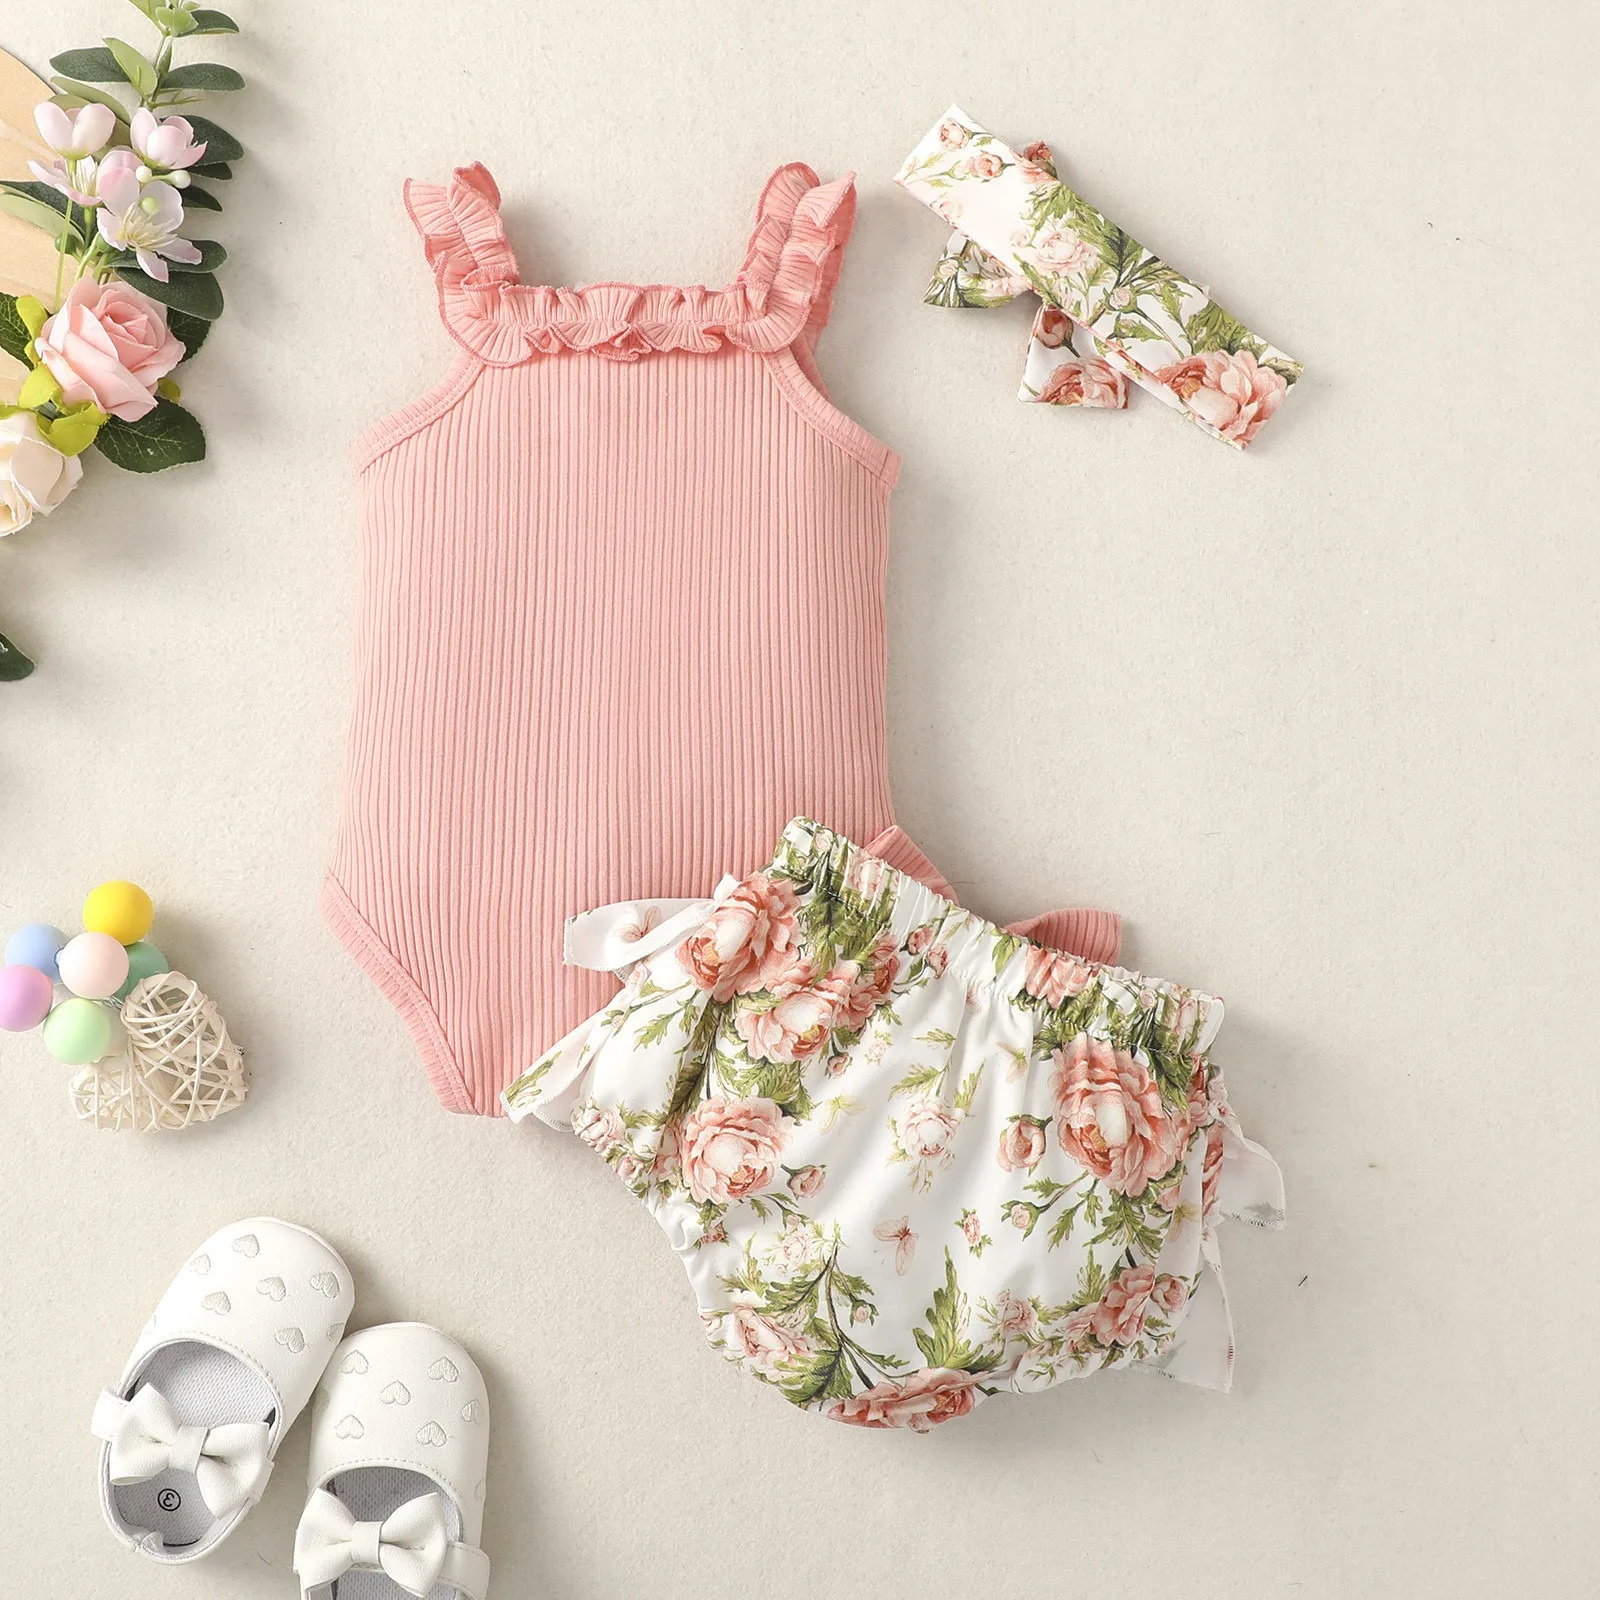 

3pc New Kids Cute Floral Romper Baby Girls Clothes Jumpsuit Overall +Shorts+Headband 0-24M Toddler Newborn Outfits Children Set